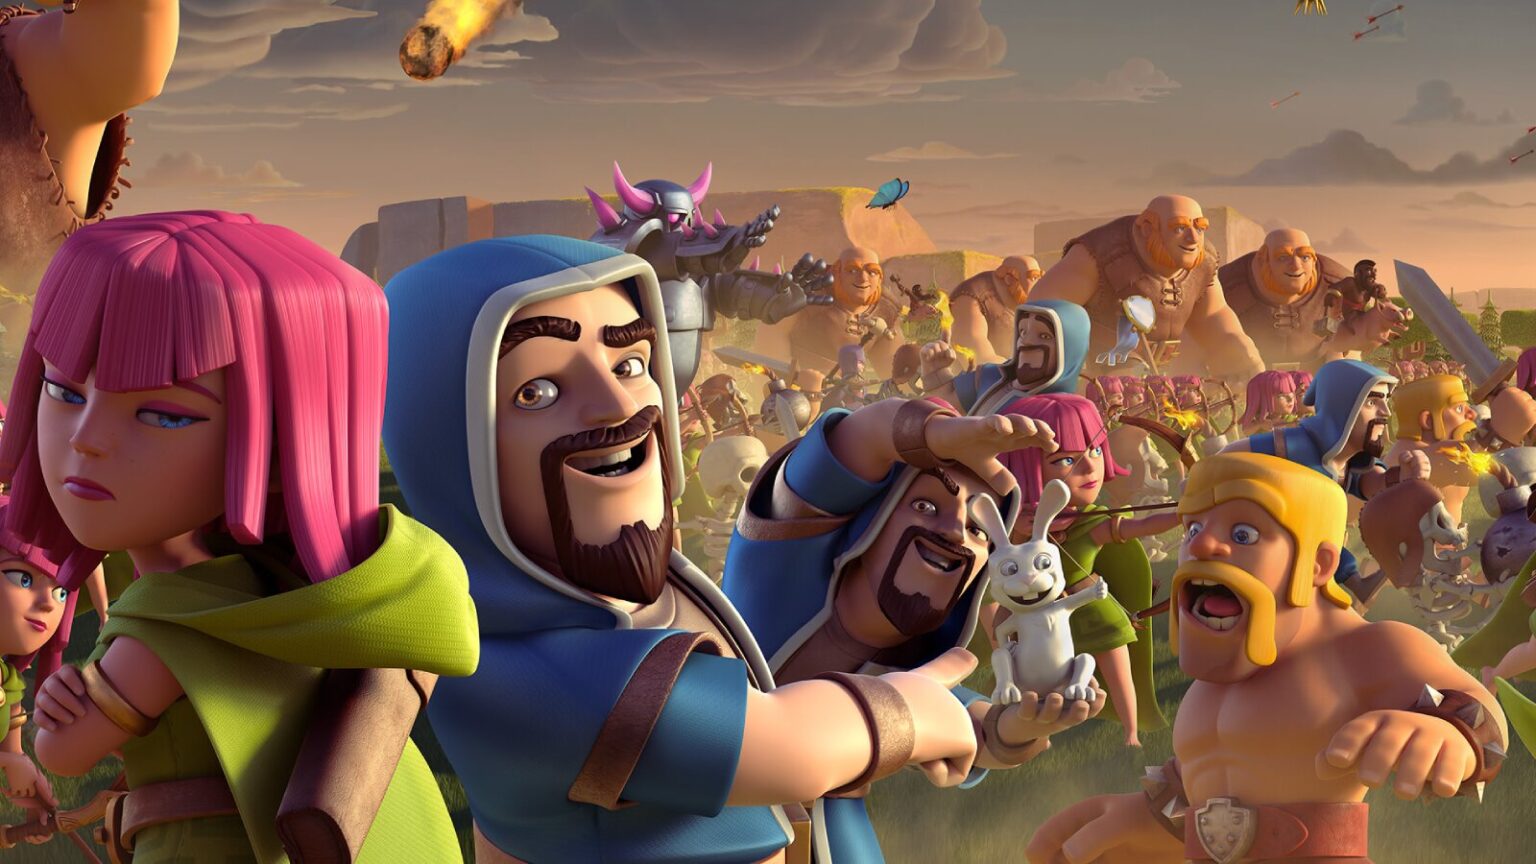 Animated characters charge into battle with excitement and fear